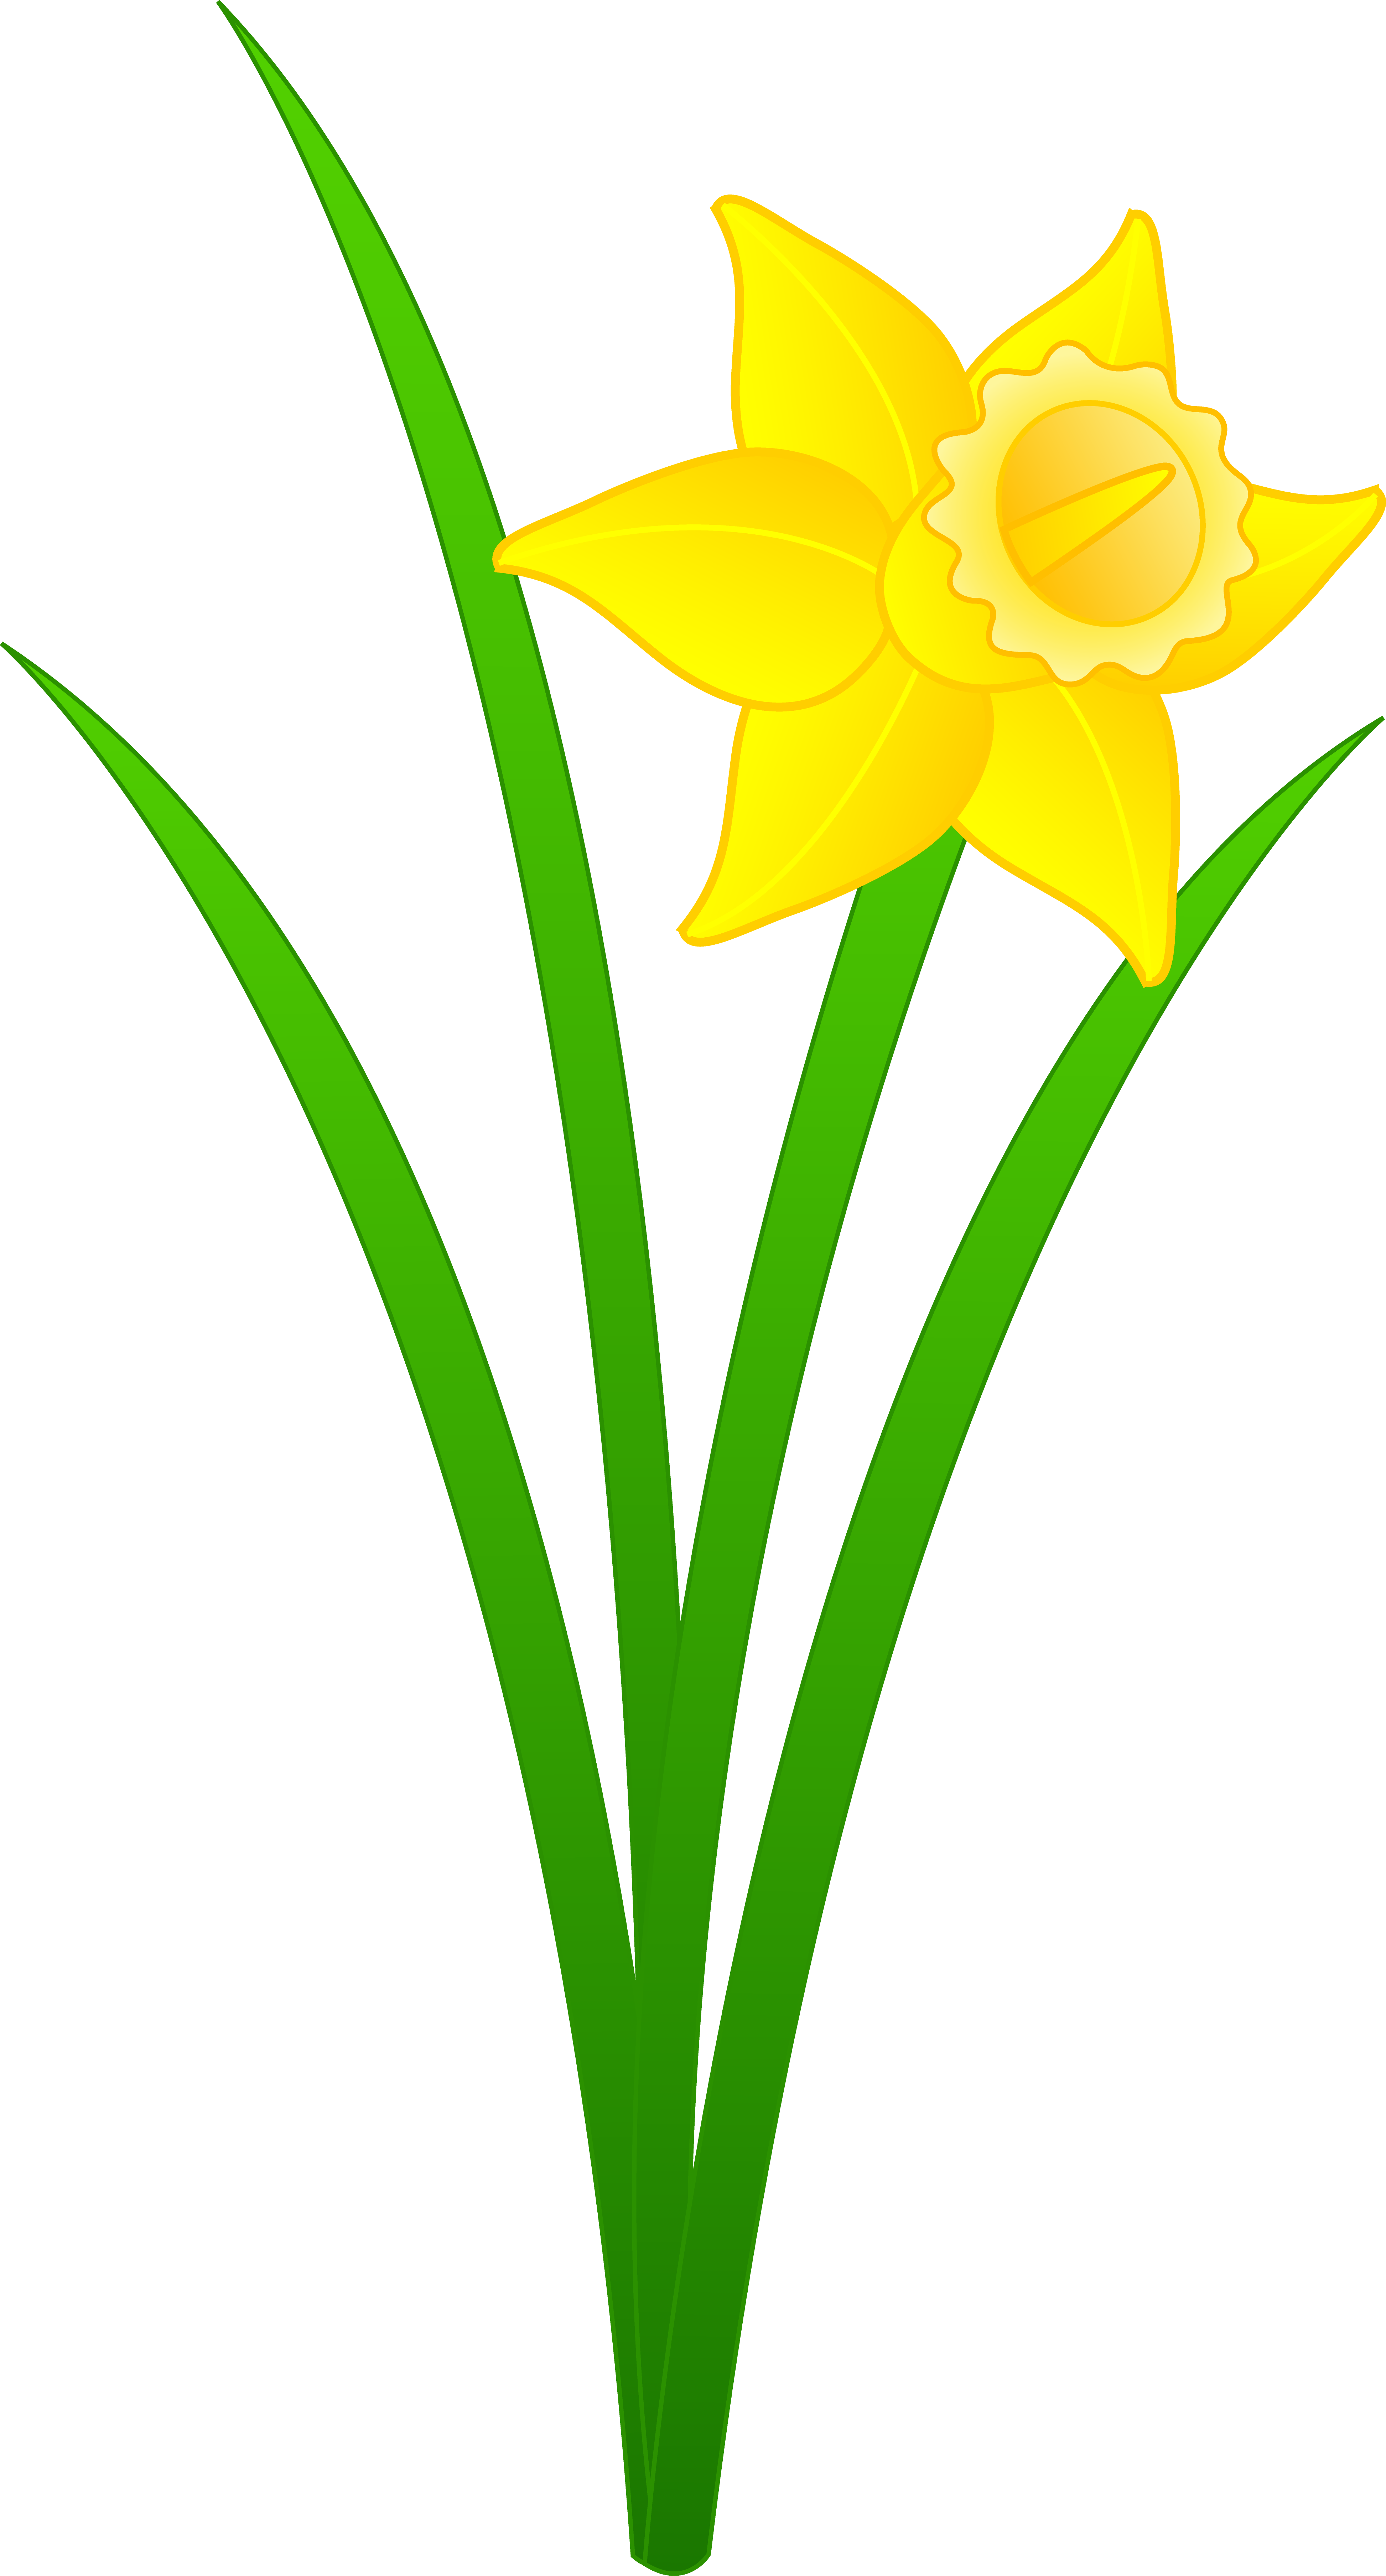 13 Daffodil Free Graphics Images - Free Clip Art Daffodils Flower ...